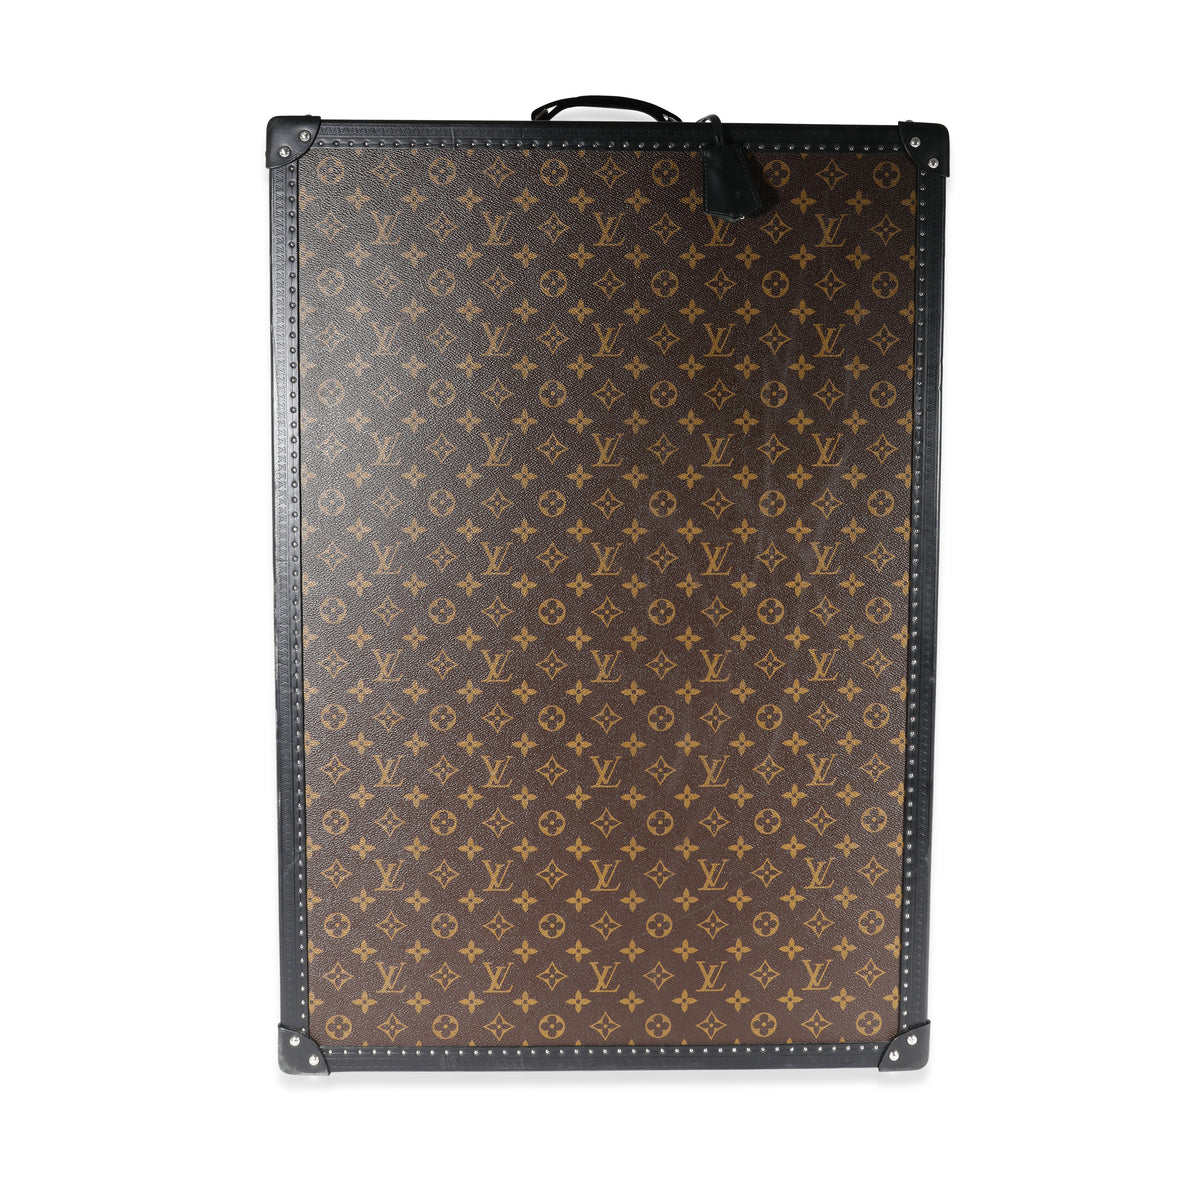 the louis vuitton monogram sneaker trunk is perfect for the ultra